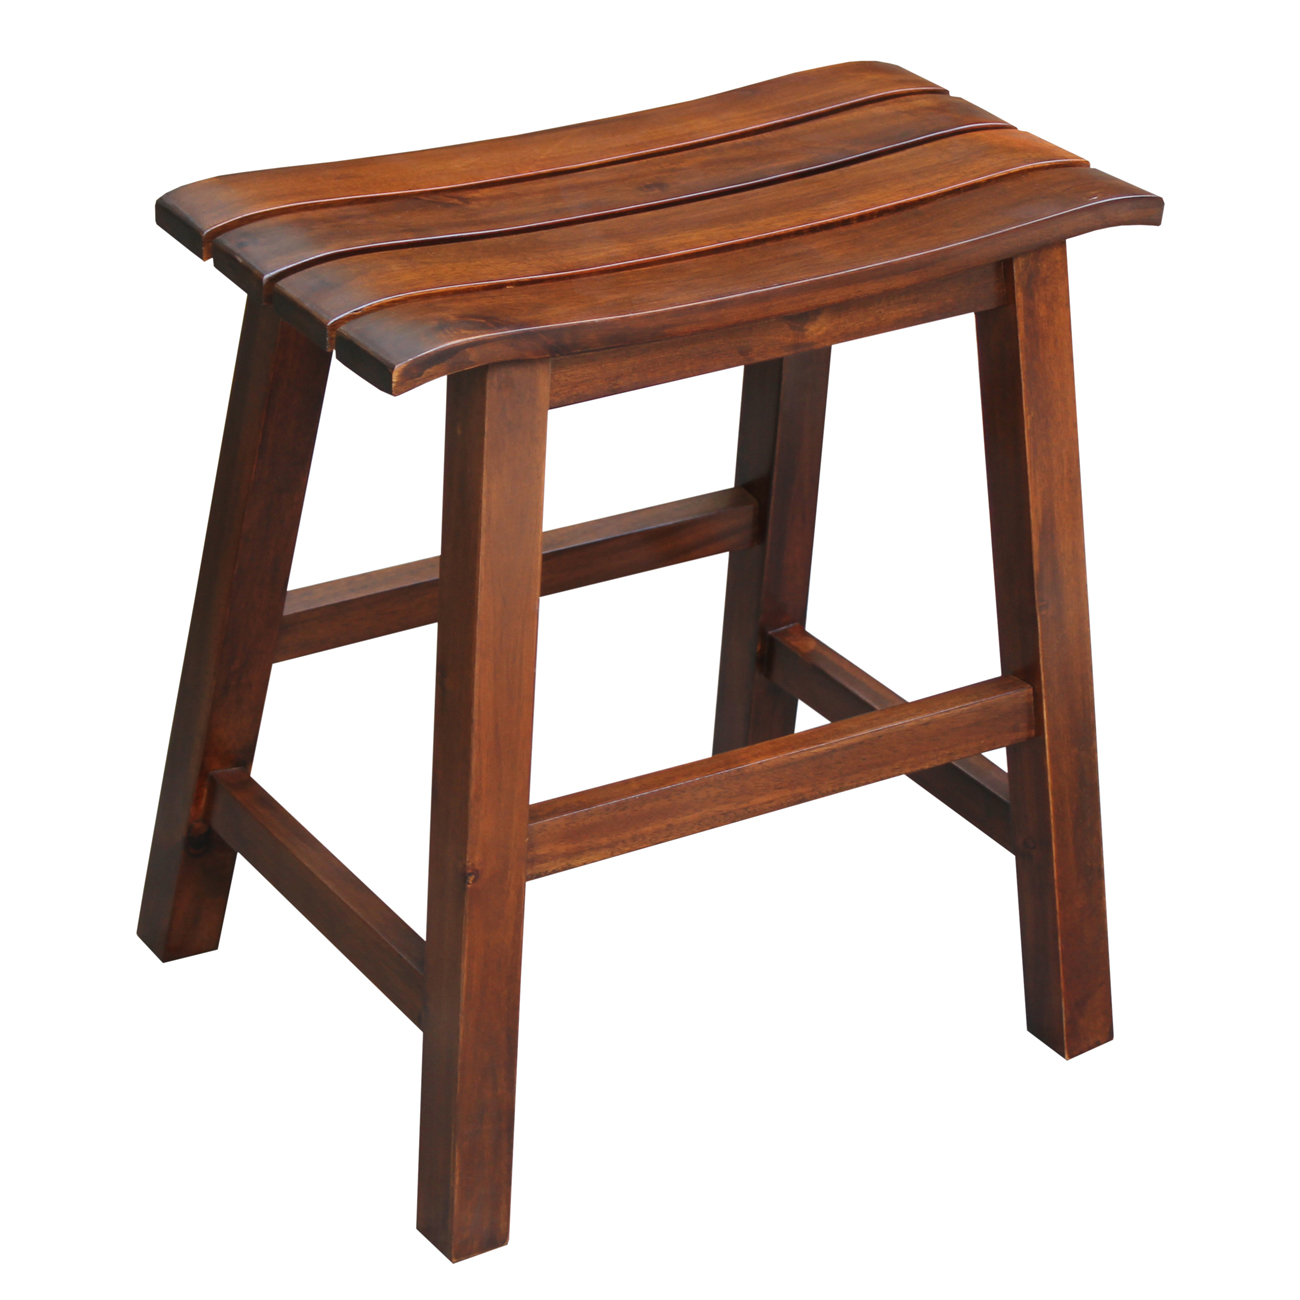 International Concepts Espresso Slat Seat Stool - 18 in. Seat Height